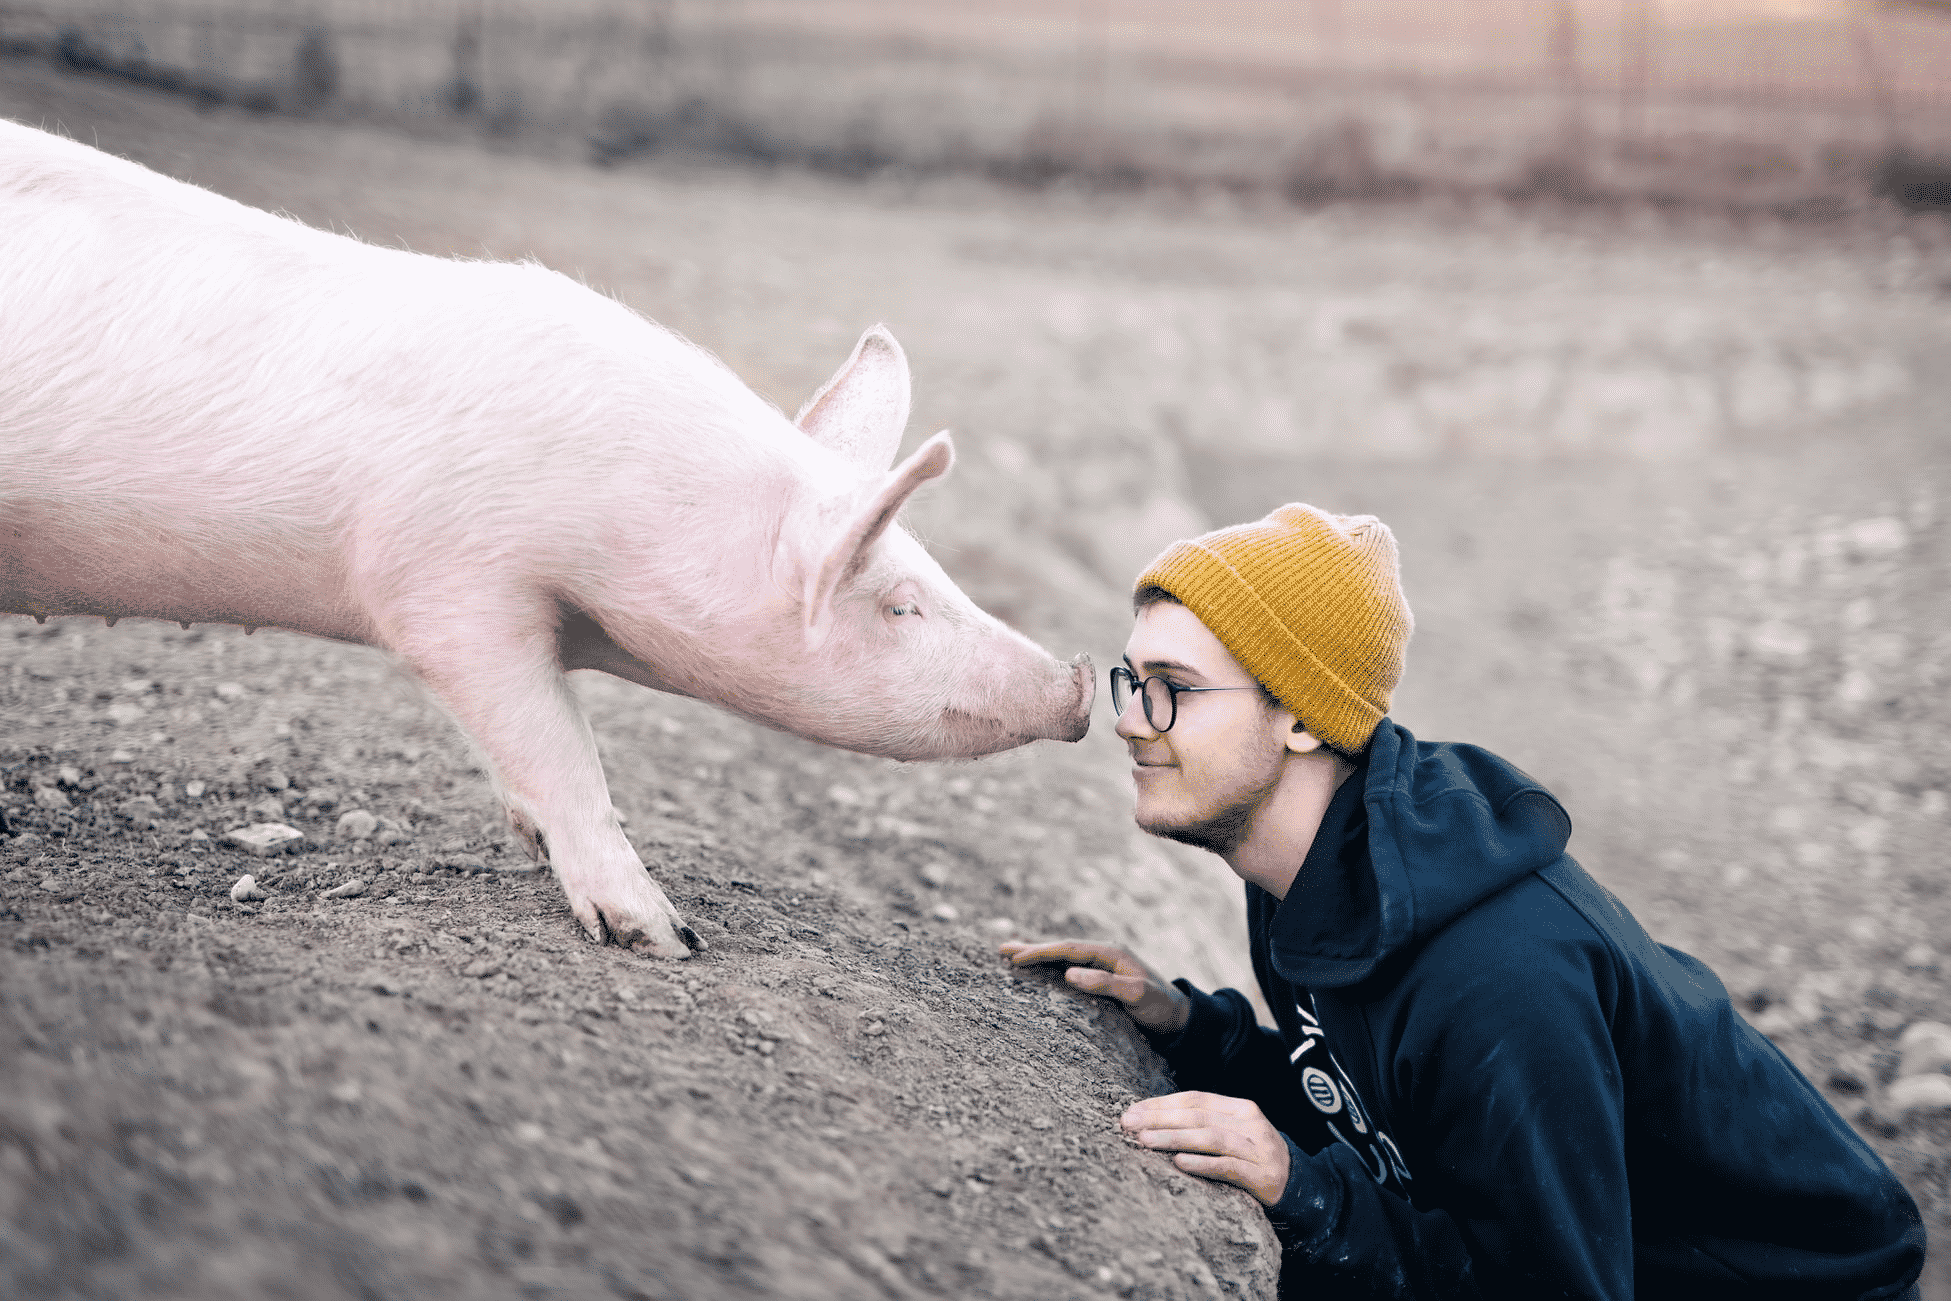 eye to eye contact of a pig and a man with mustard bonnet